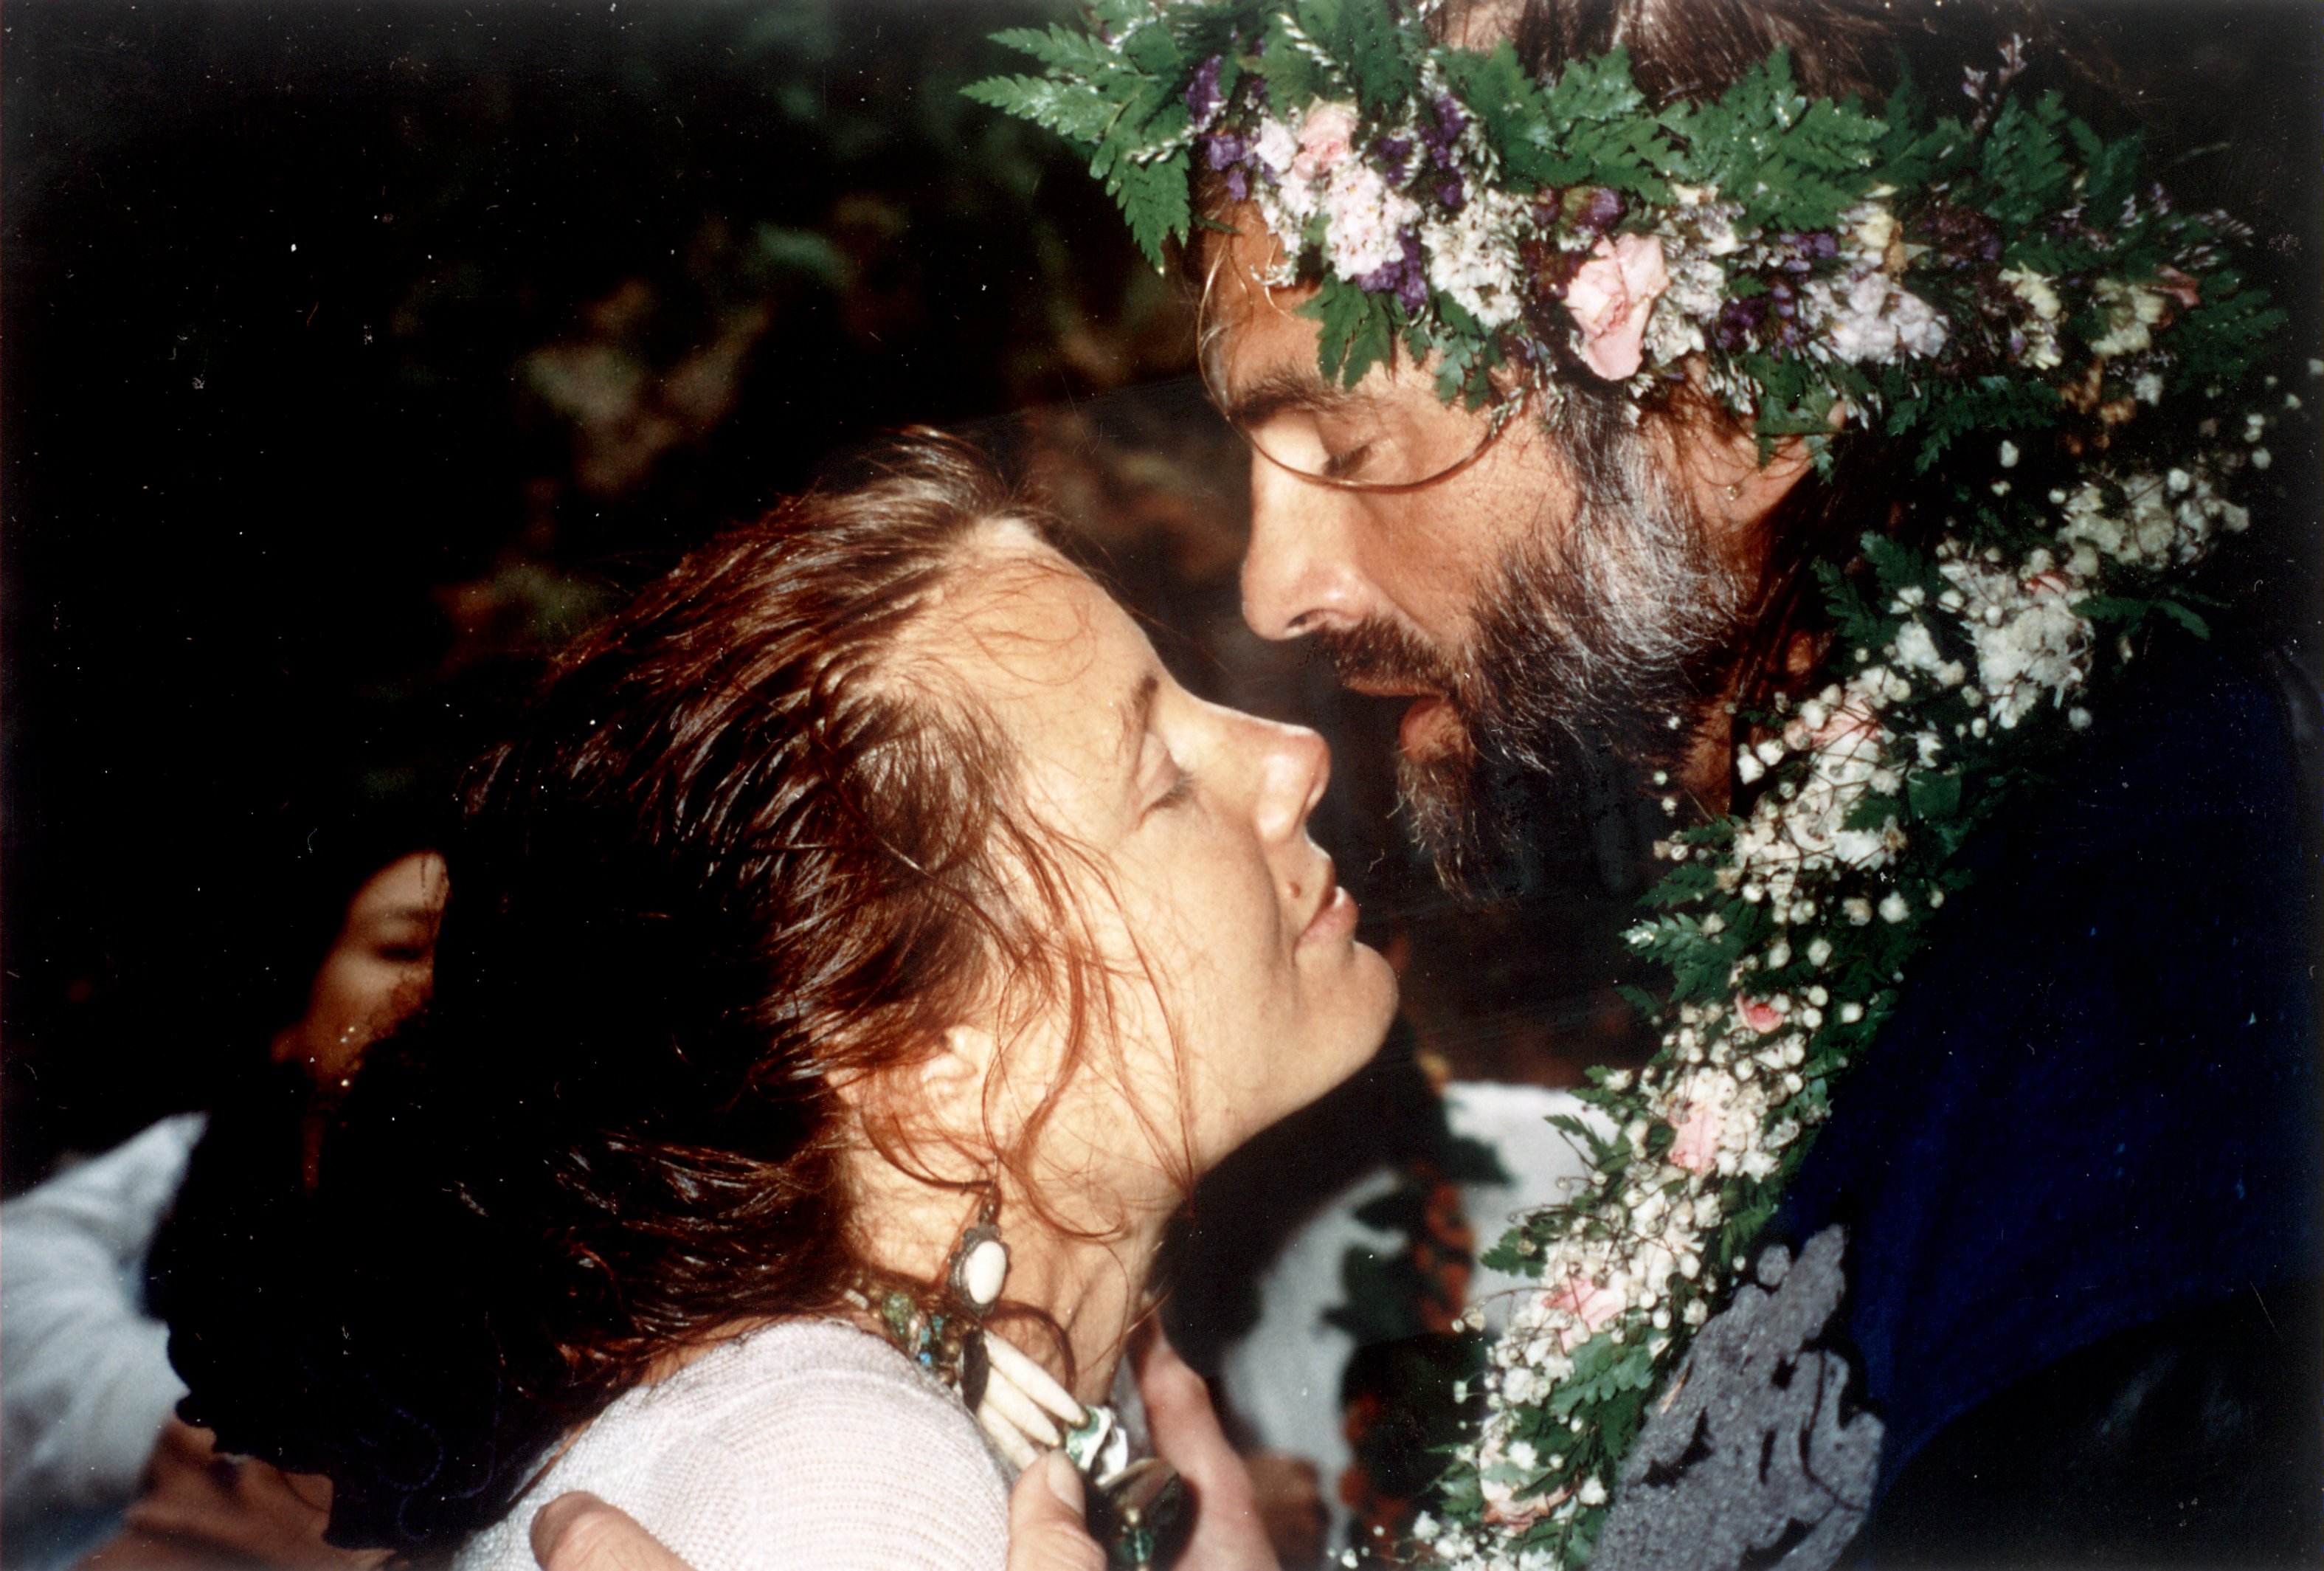  Singer Kenny Loggins with his 2nd wife, therapist Julia Cooper, at their rain-soaked 1992 nuptials. | Source: Getty Images